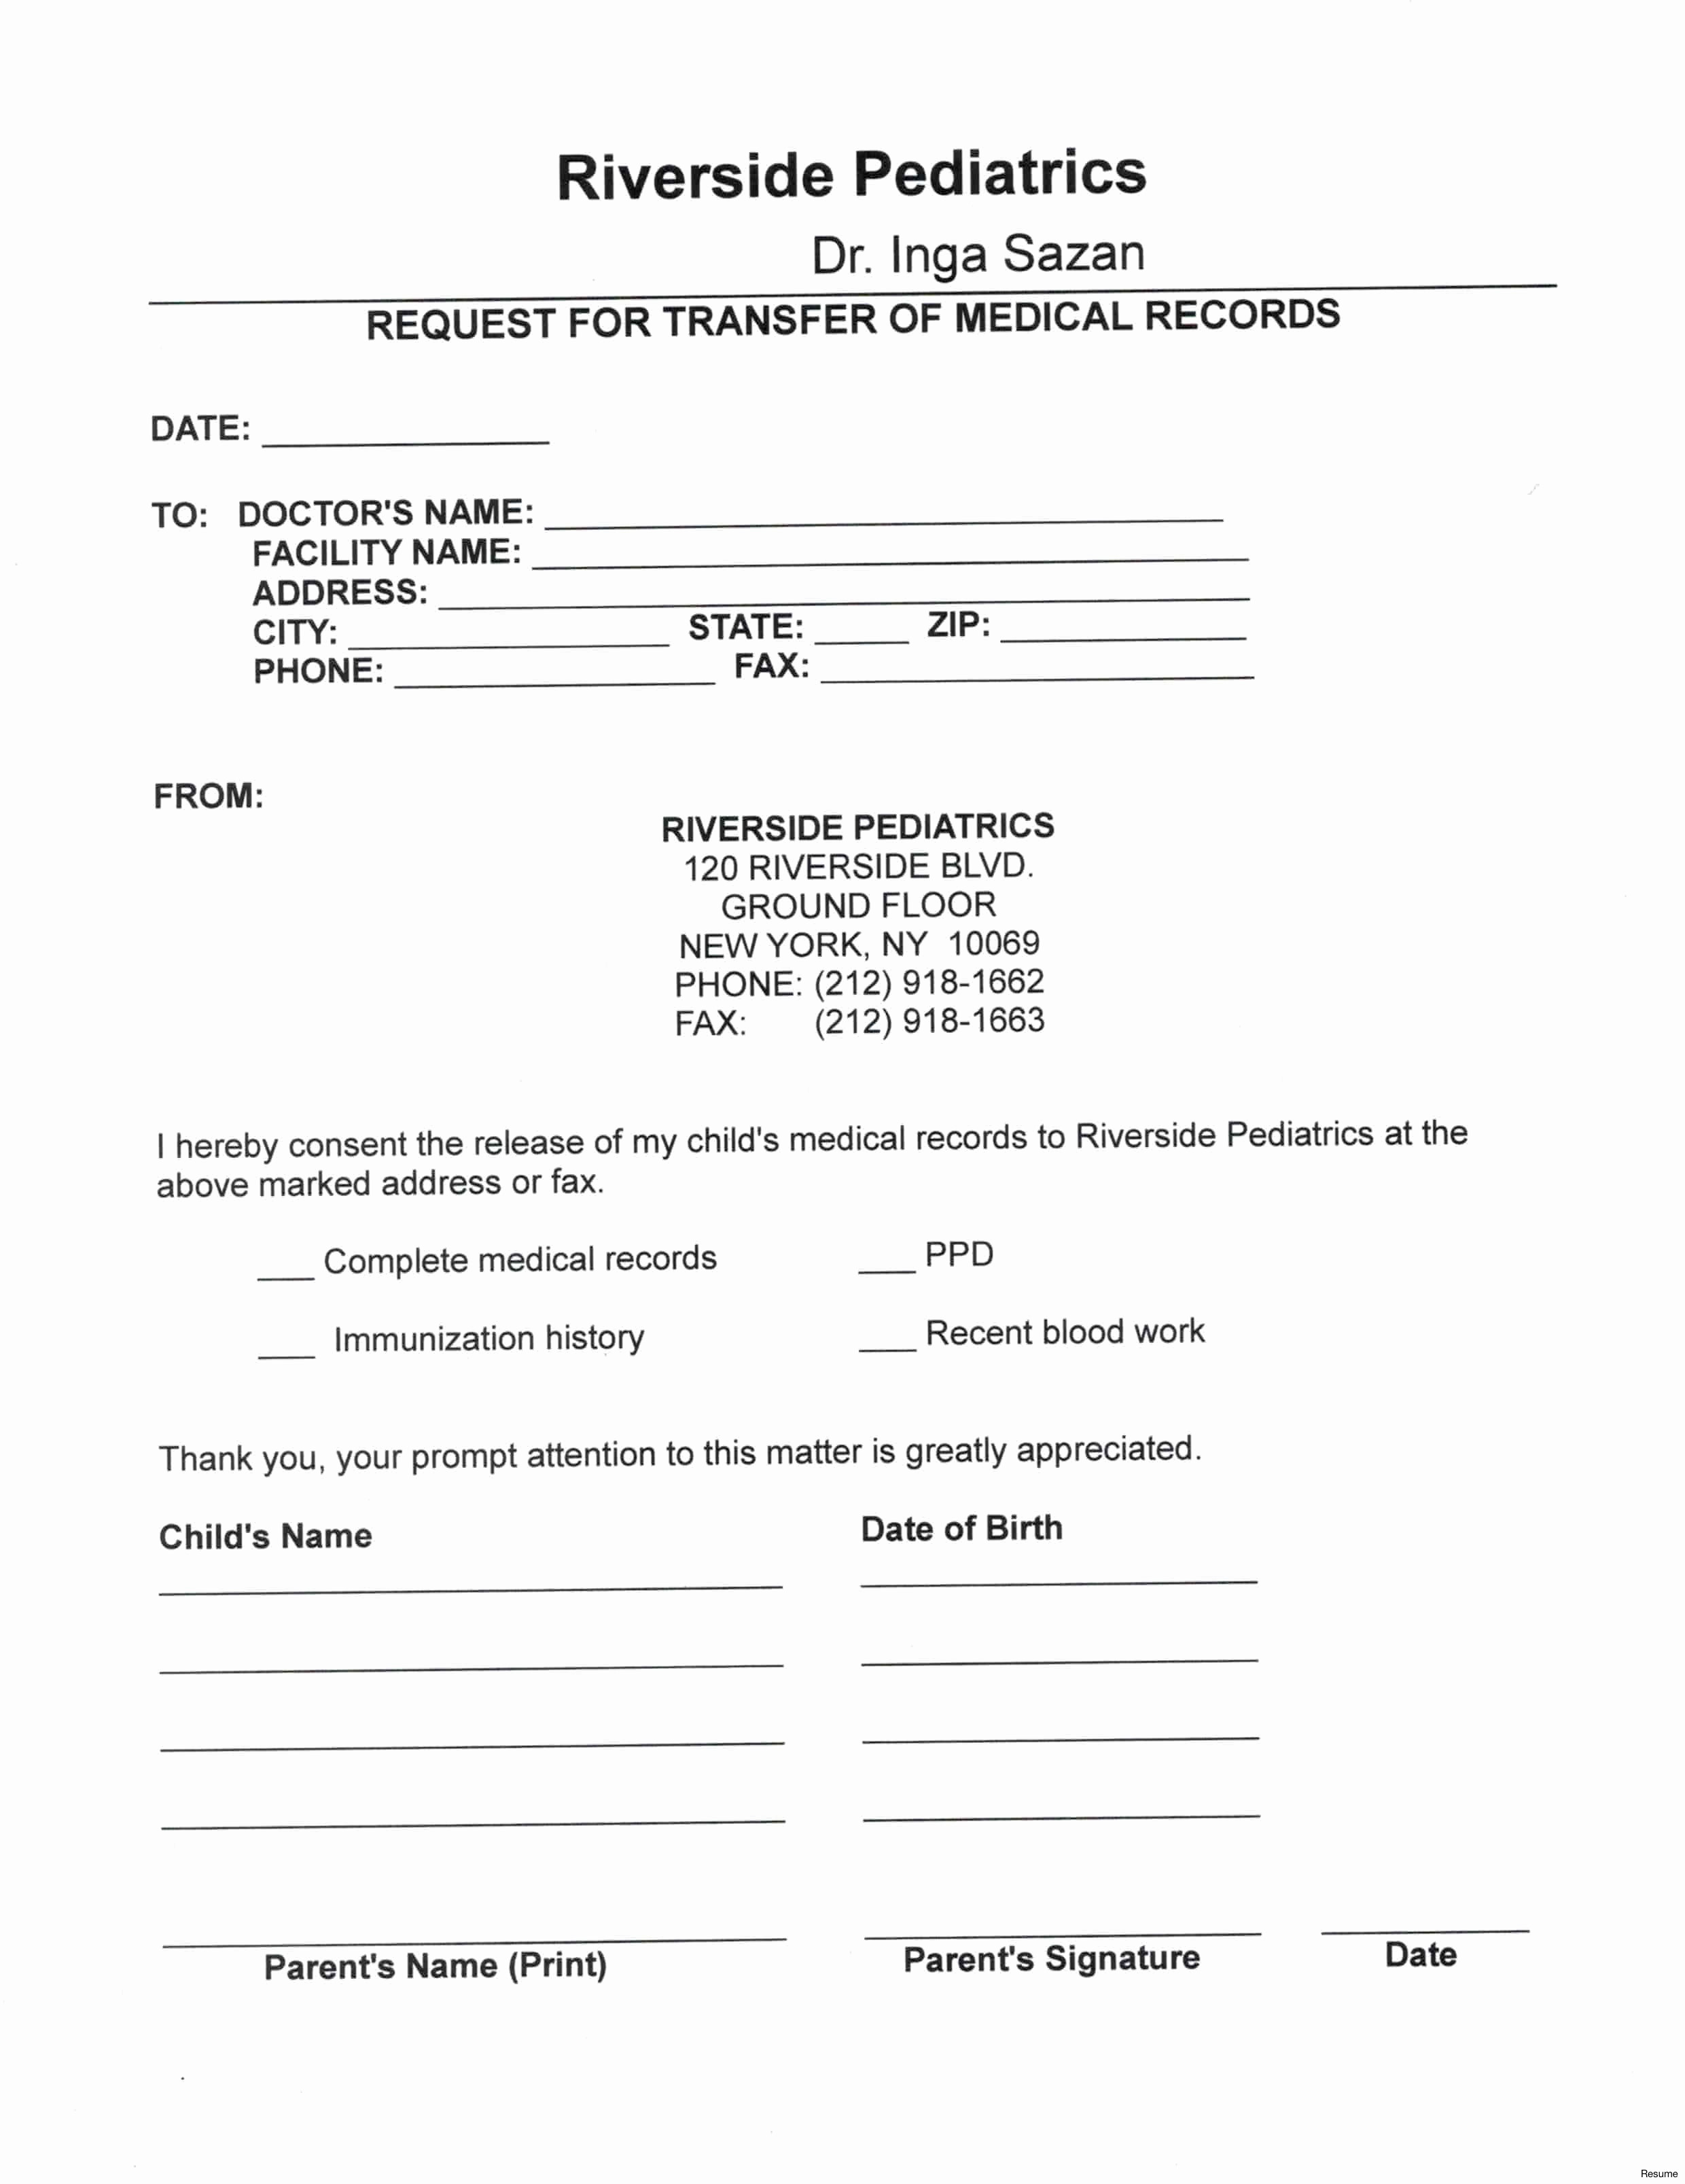 Request for Medical Records Template Letter - Medical Records Release form Template Elegant Medical Request form